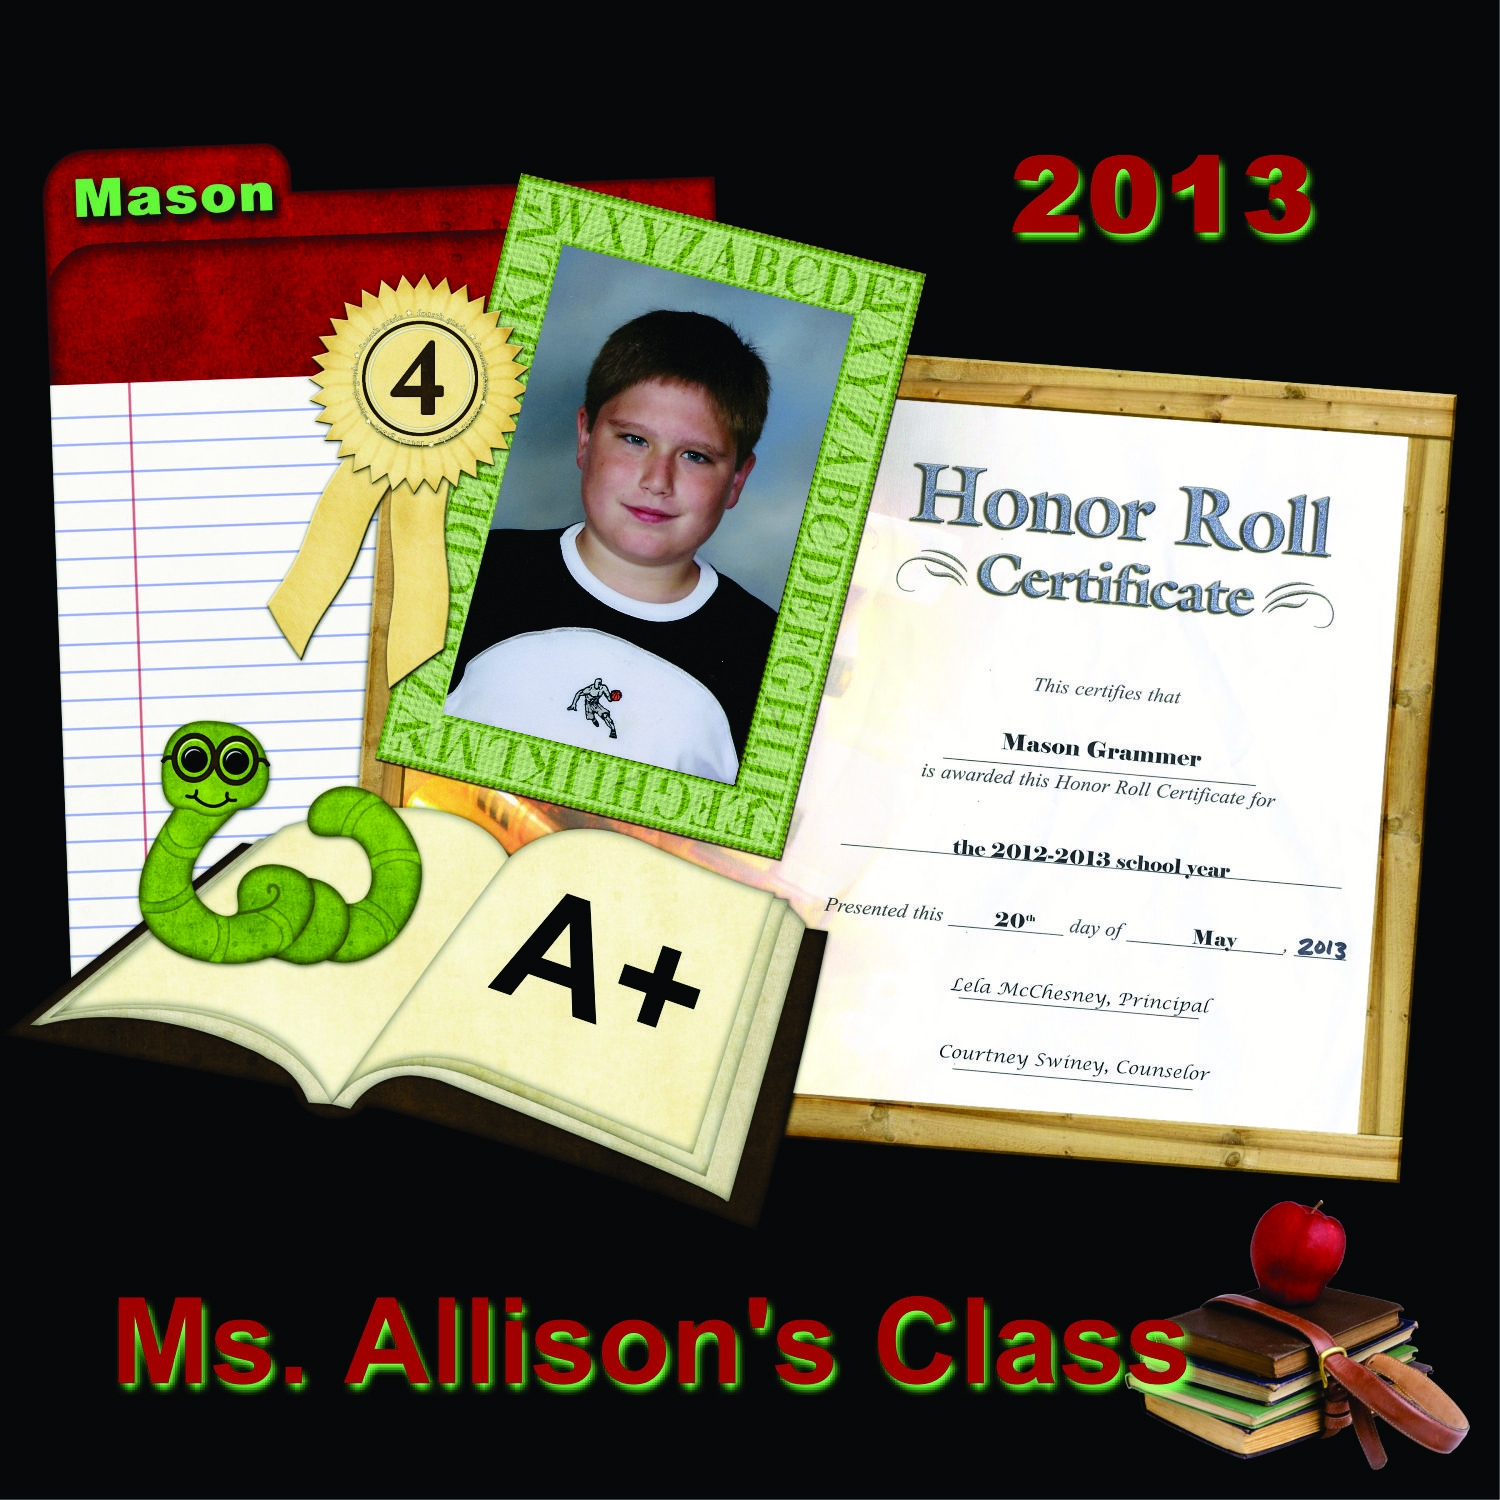 School Awards made with sublimation printing